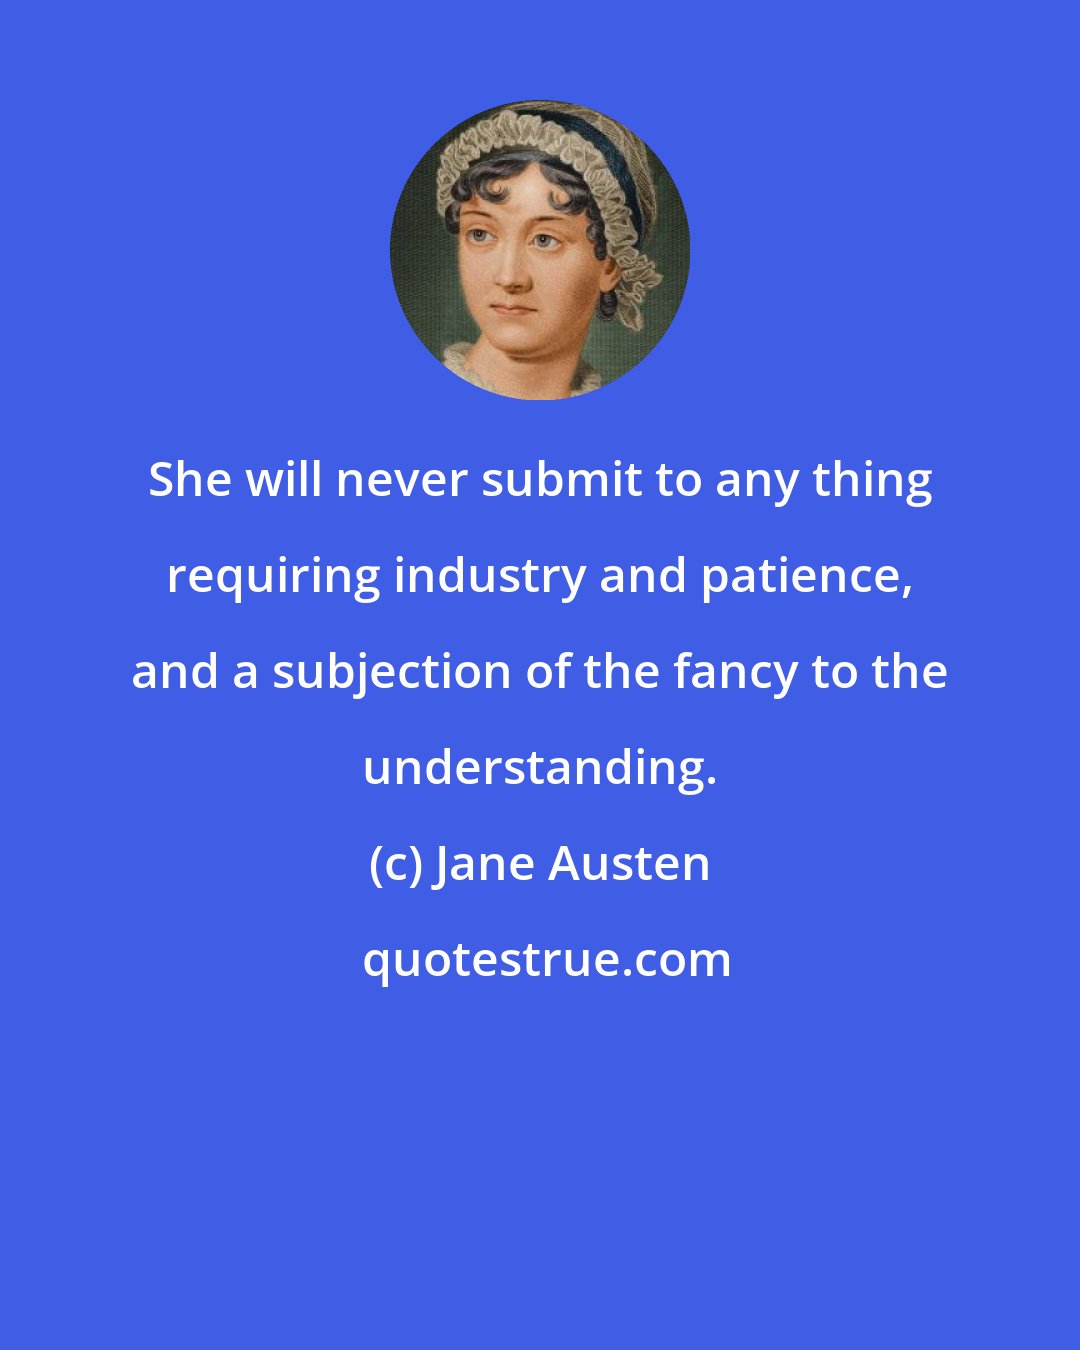 Jane Austen: She will never submit to any thing requiring industry and patience, and a subjection of the fancy to the understanding.